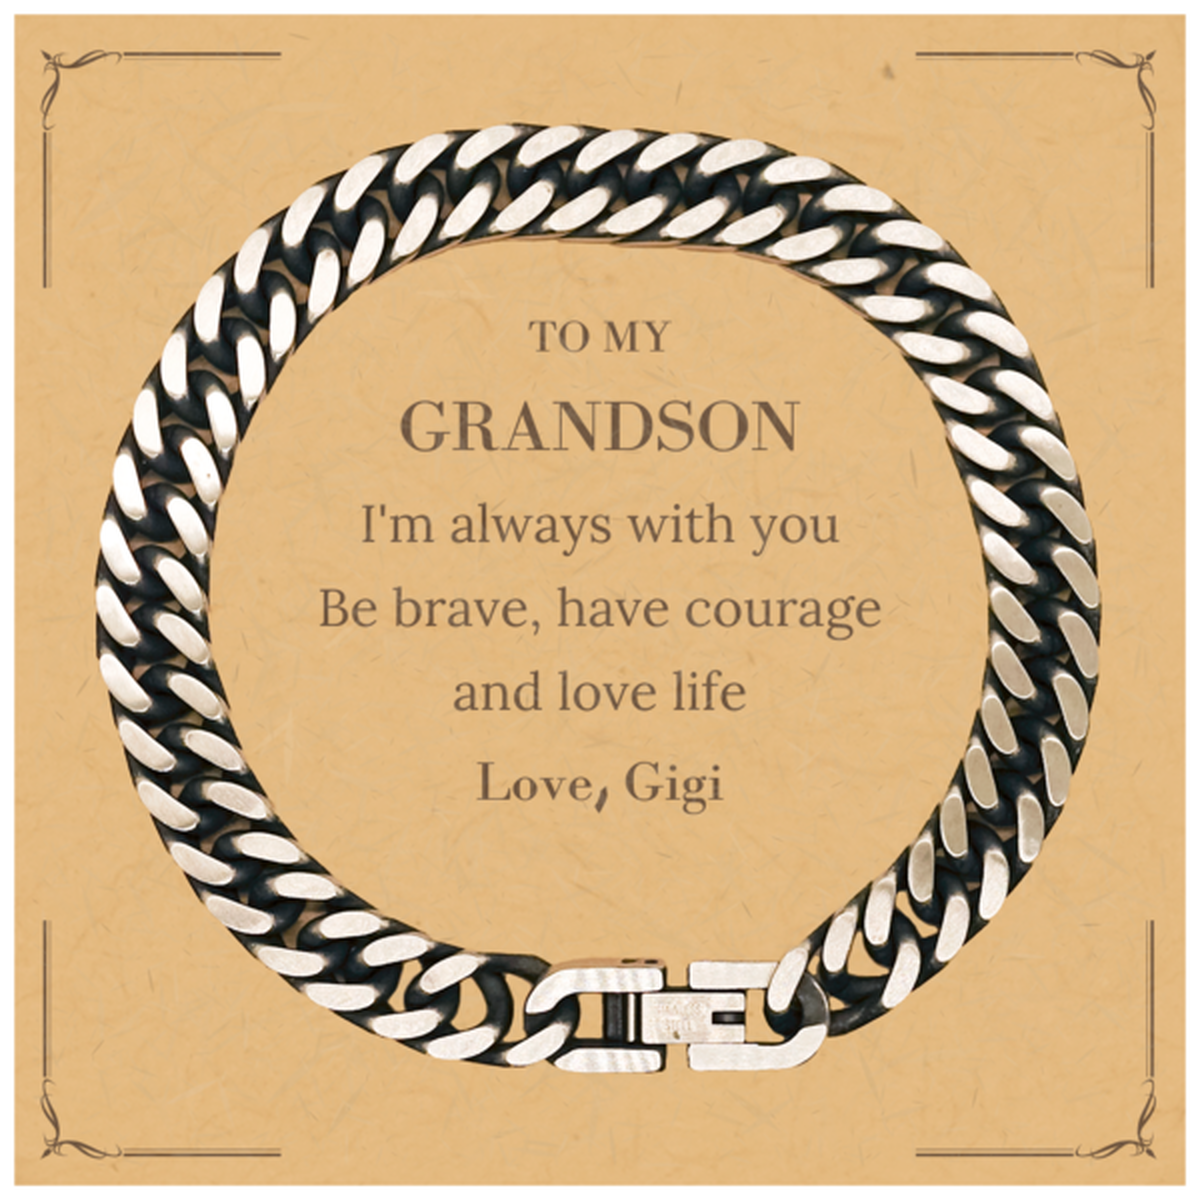 To My Grandson Gifts from Gigi, Unique Cuban Link Chain Bracelet Inspirational Christmas Birthday Graduation Gifts for Grandson I'm always with you. Be brave, have courage and love life. Love, Gigi